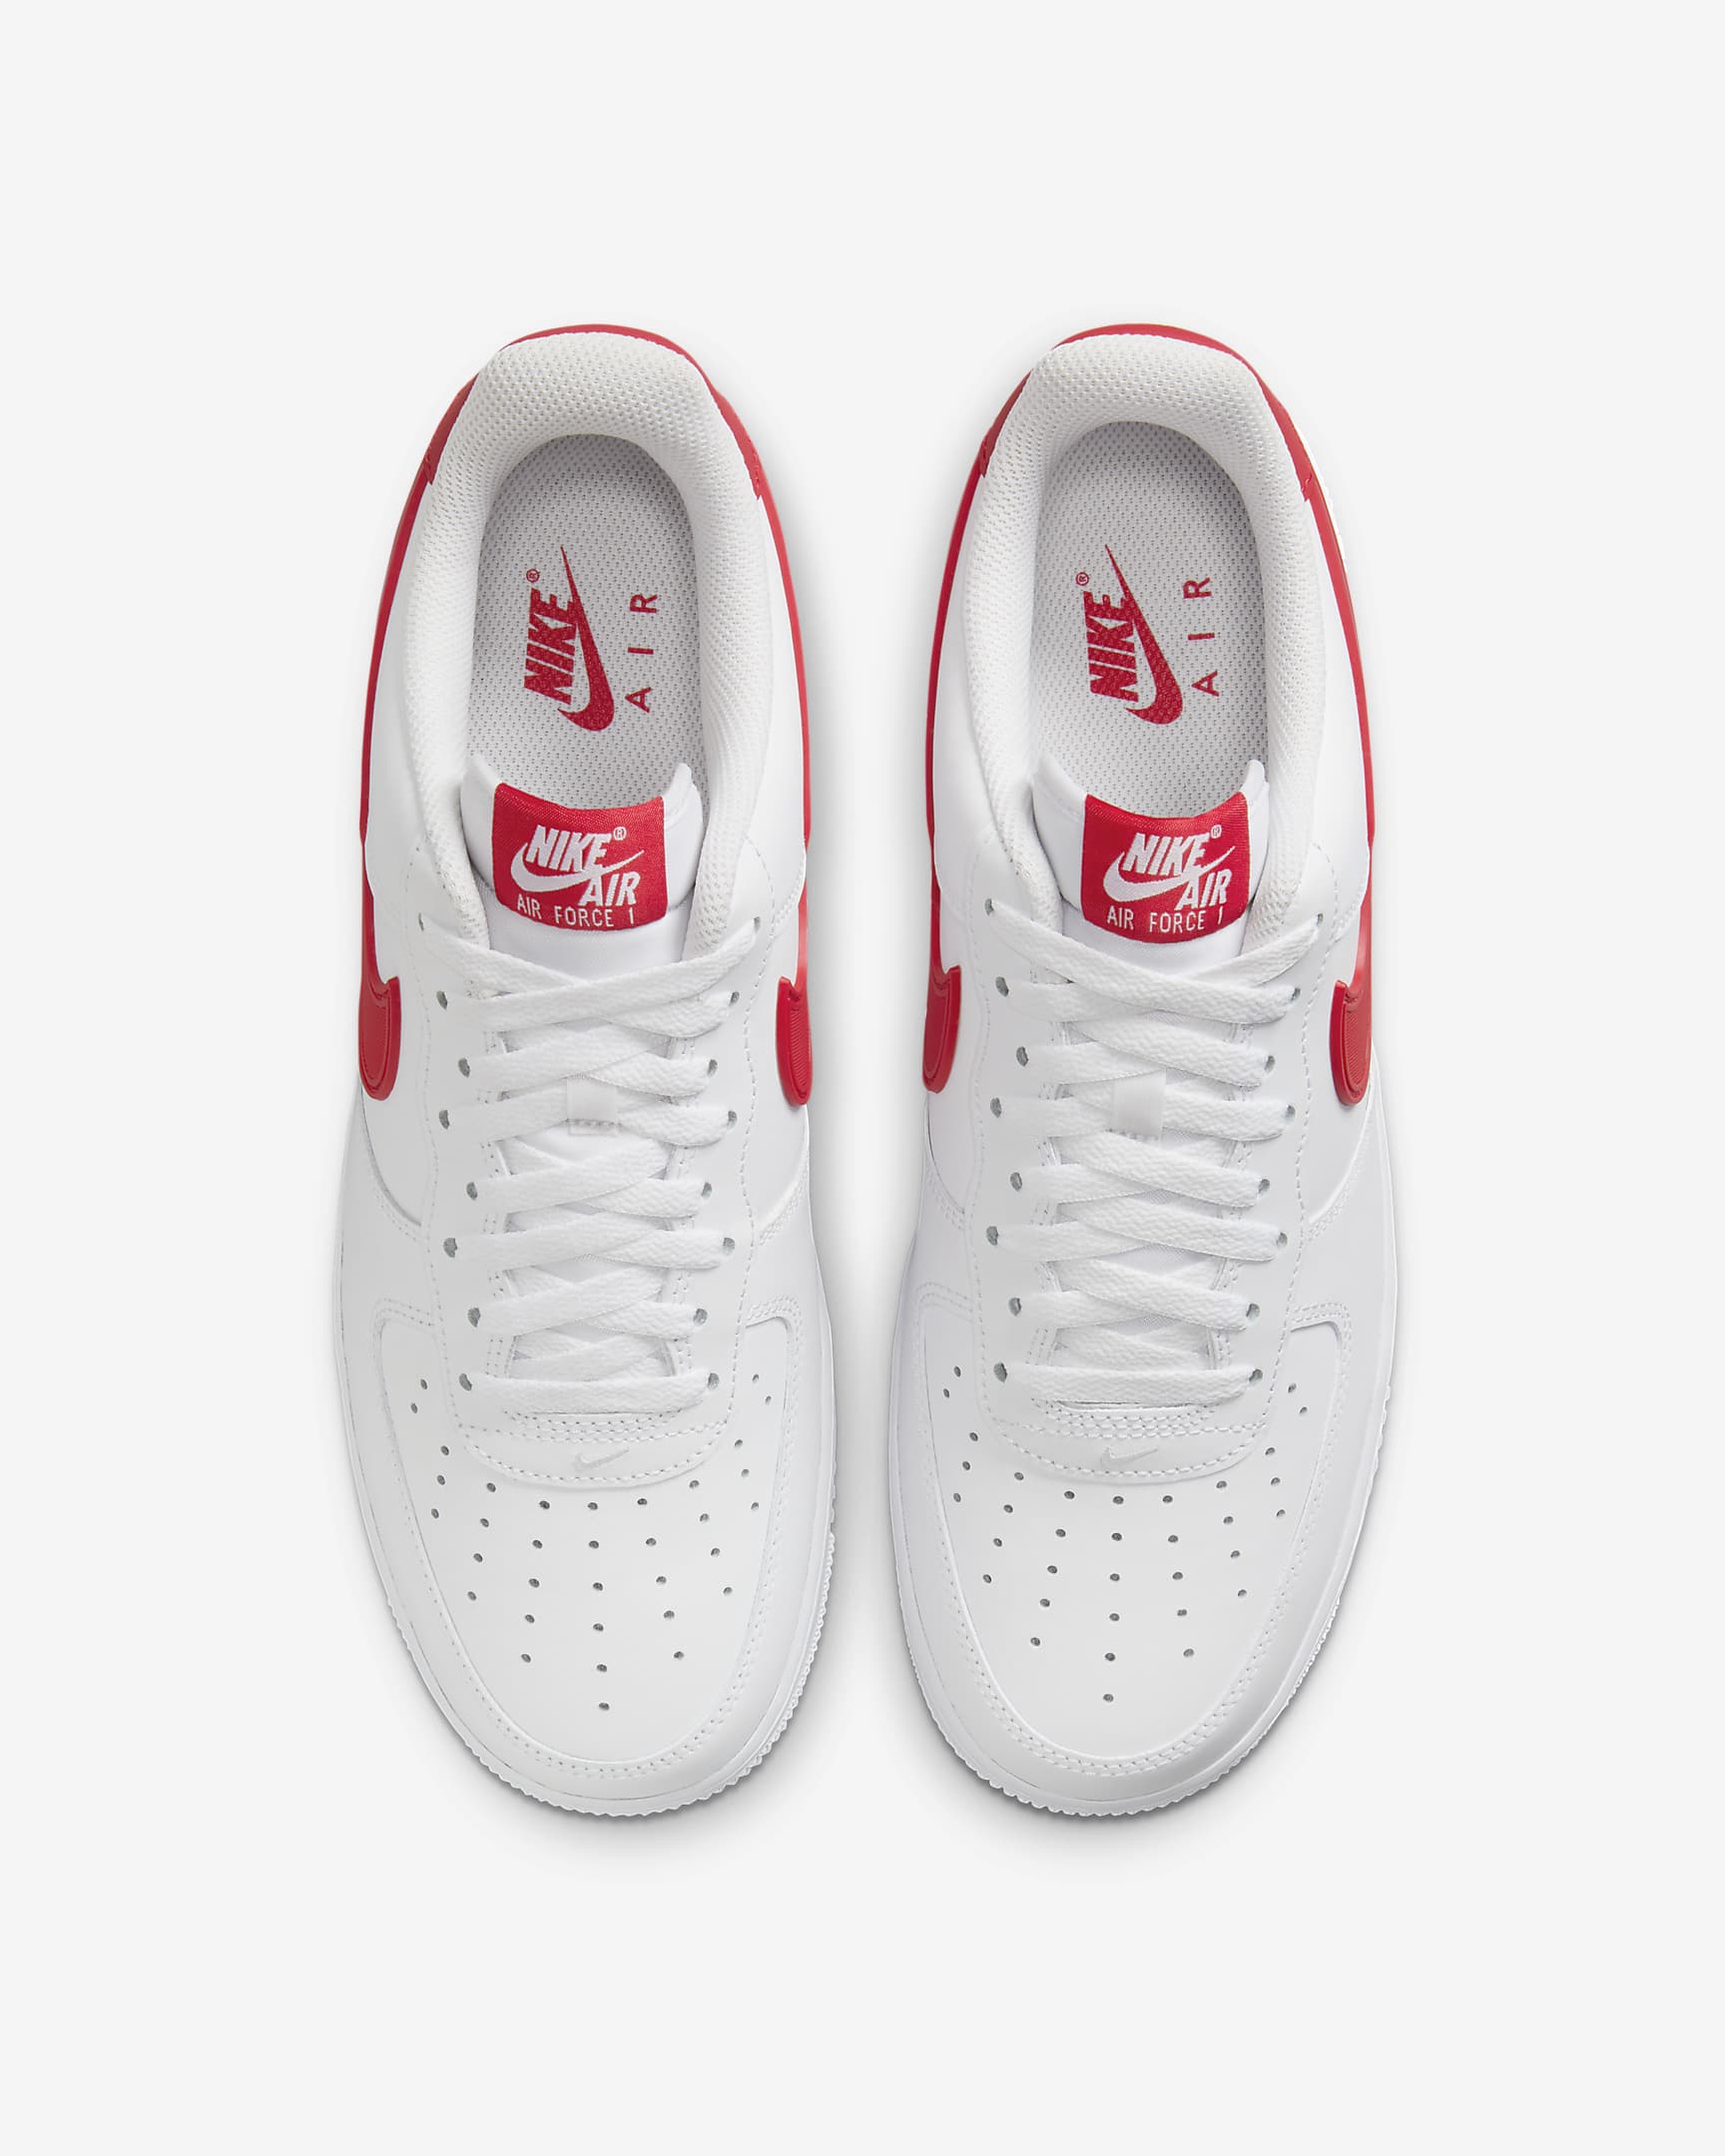 Nike Air Force 1 '07 Men's Shoes - White/Black/Fire Red